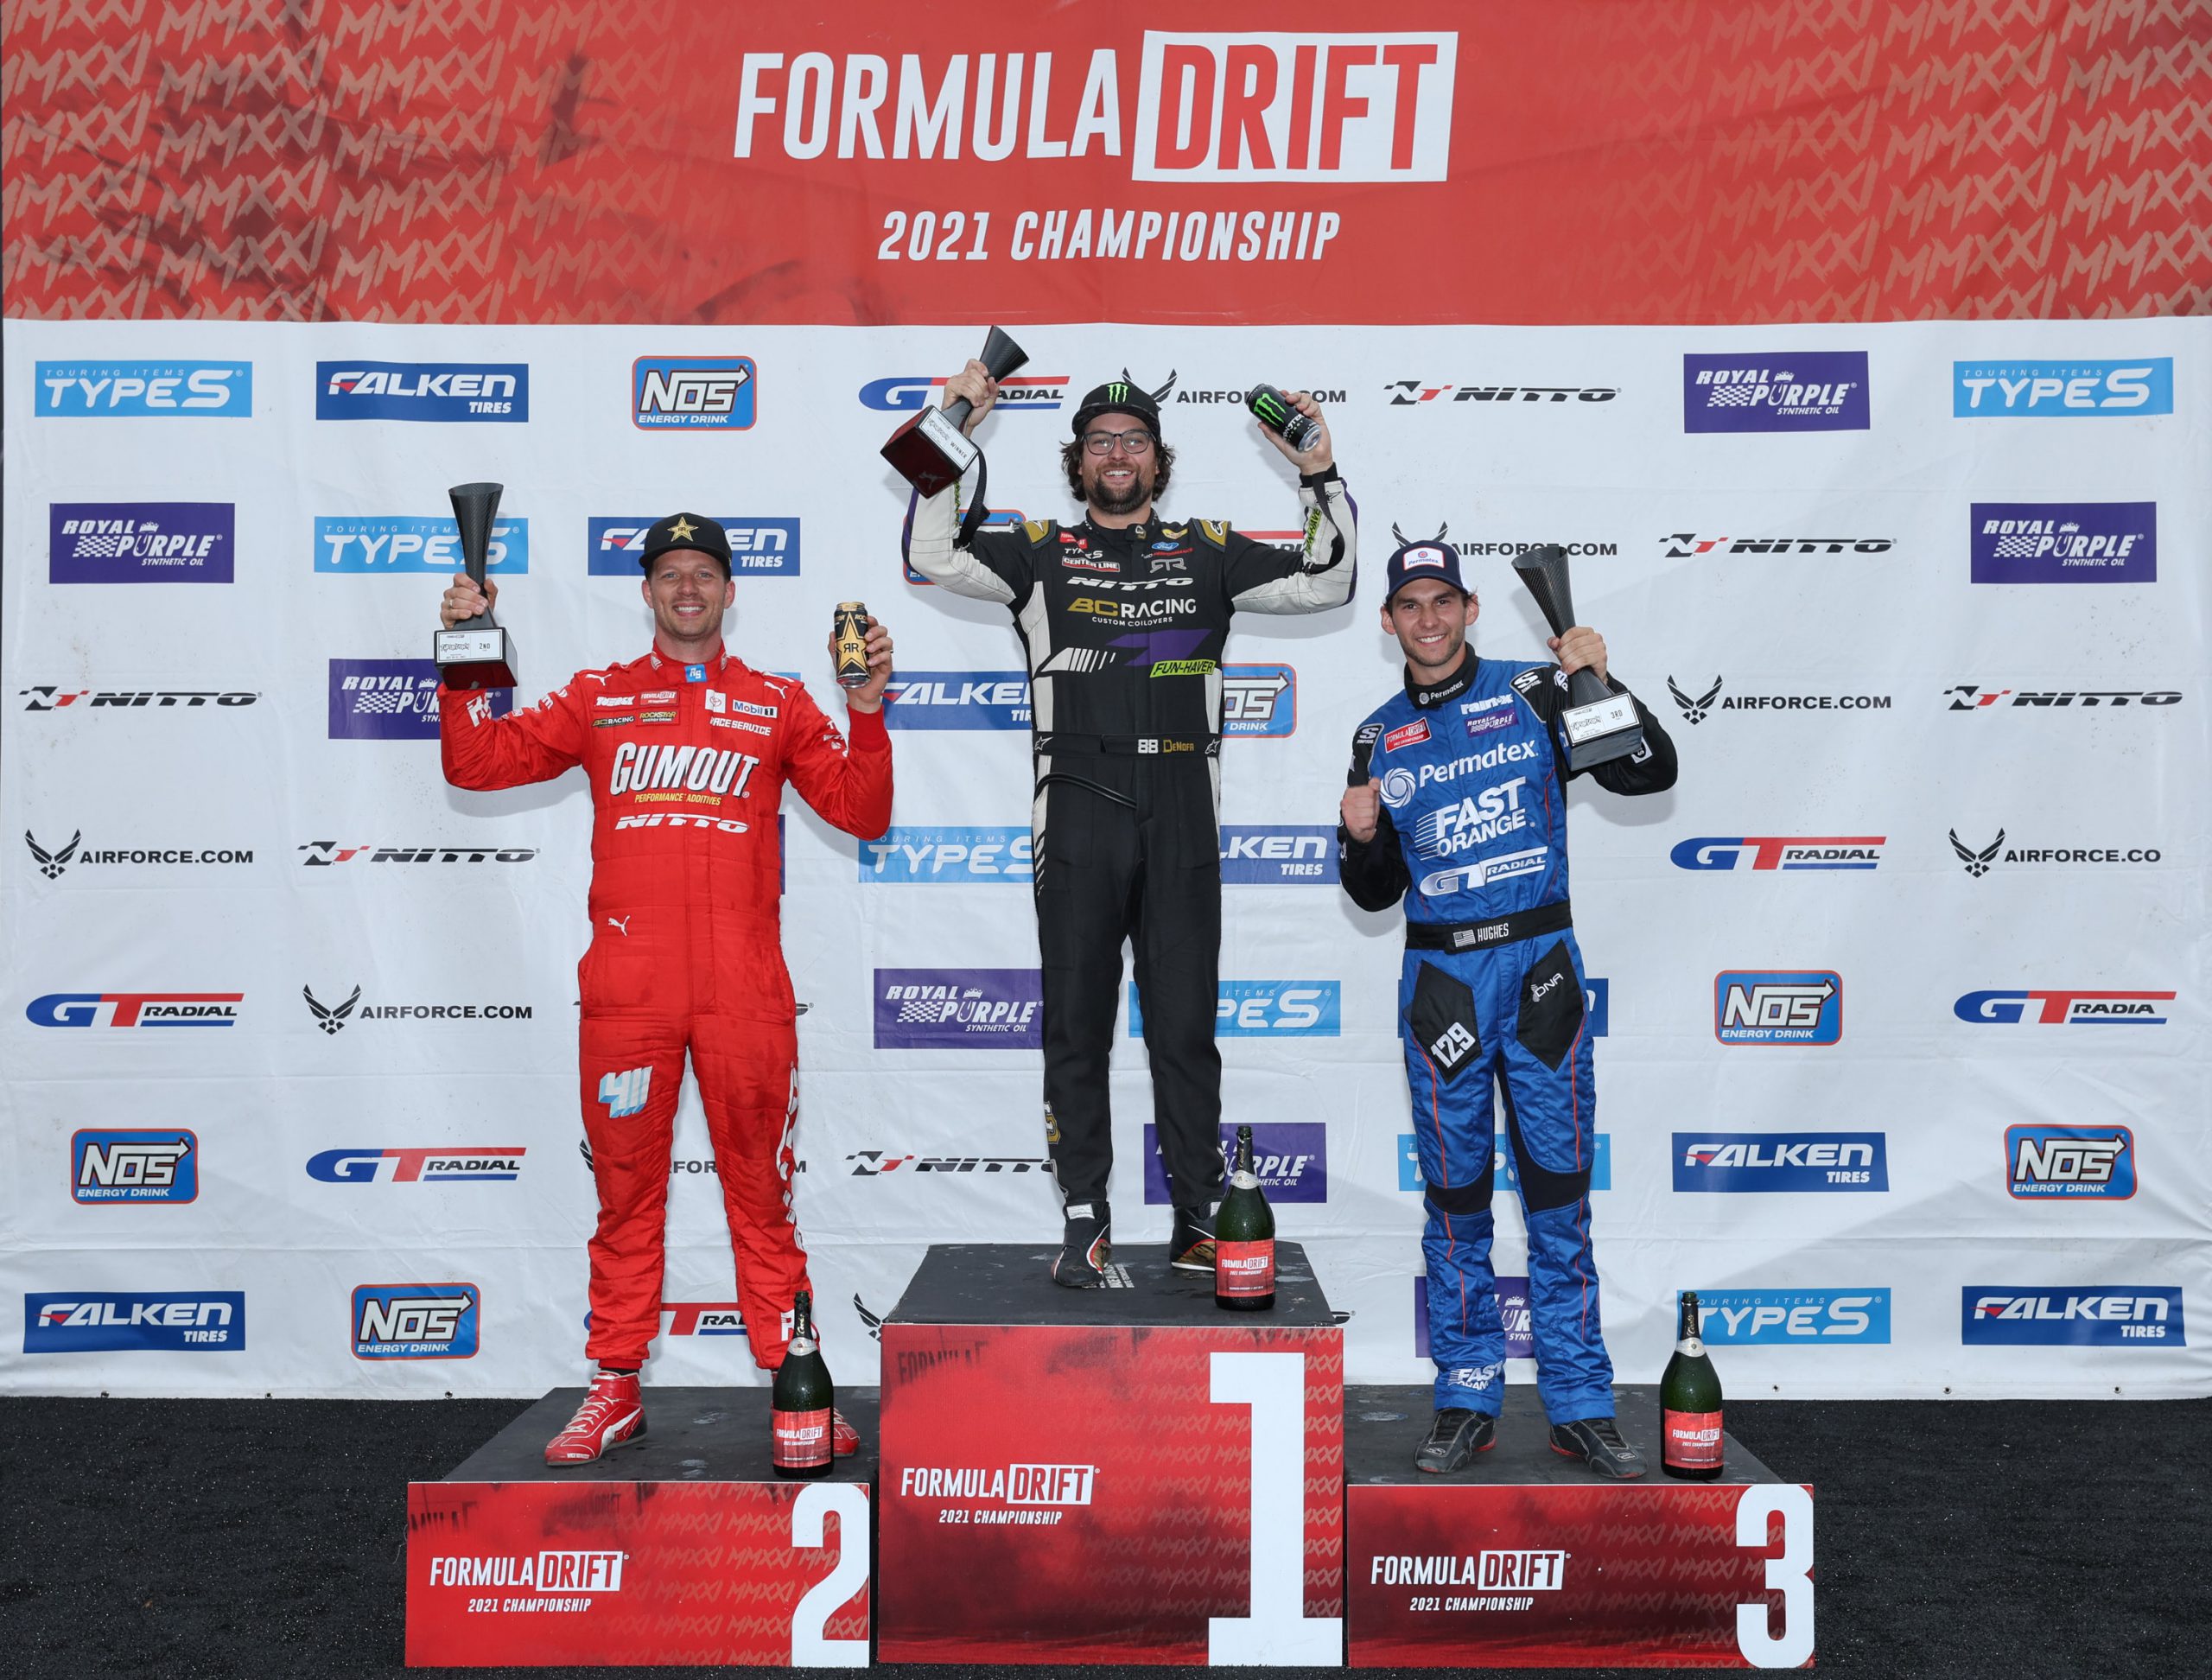 Dylan Hughes Scores Second Podium Finish for GT Radial